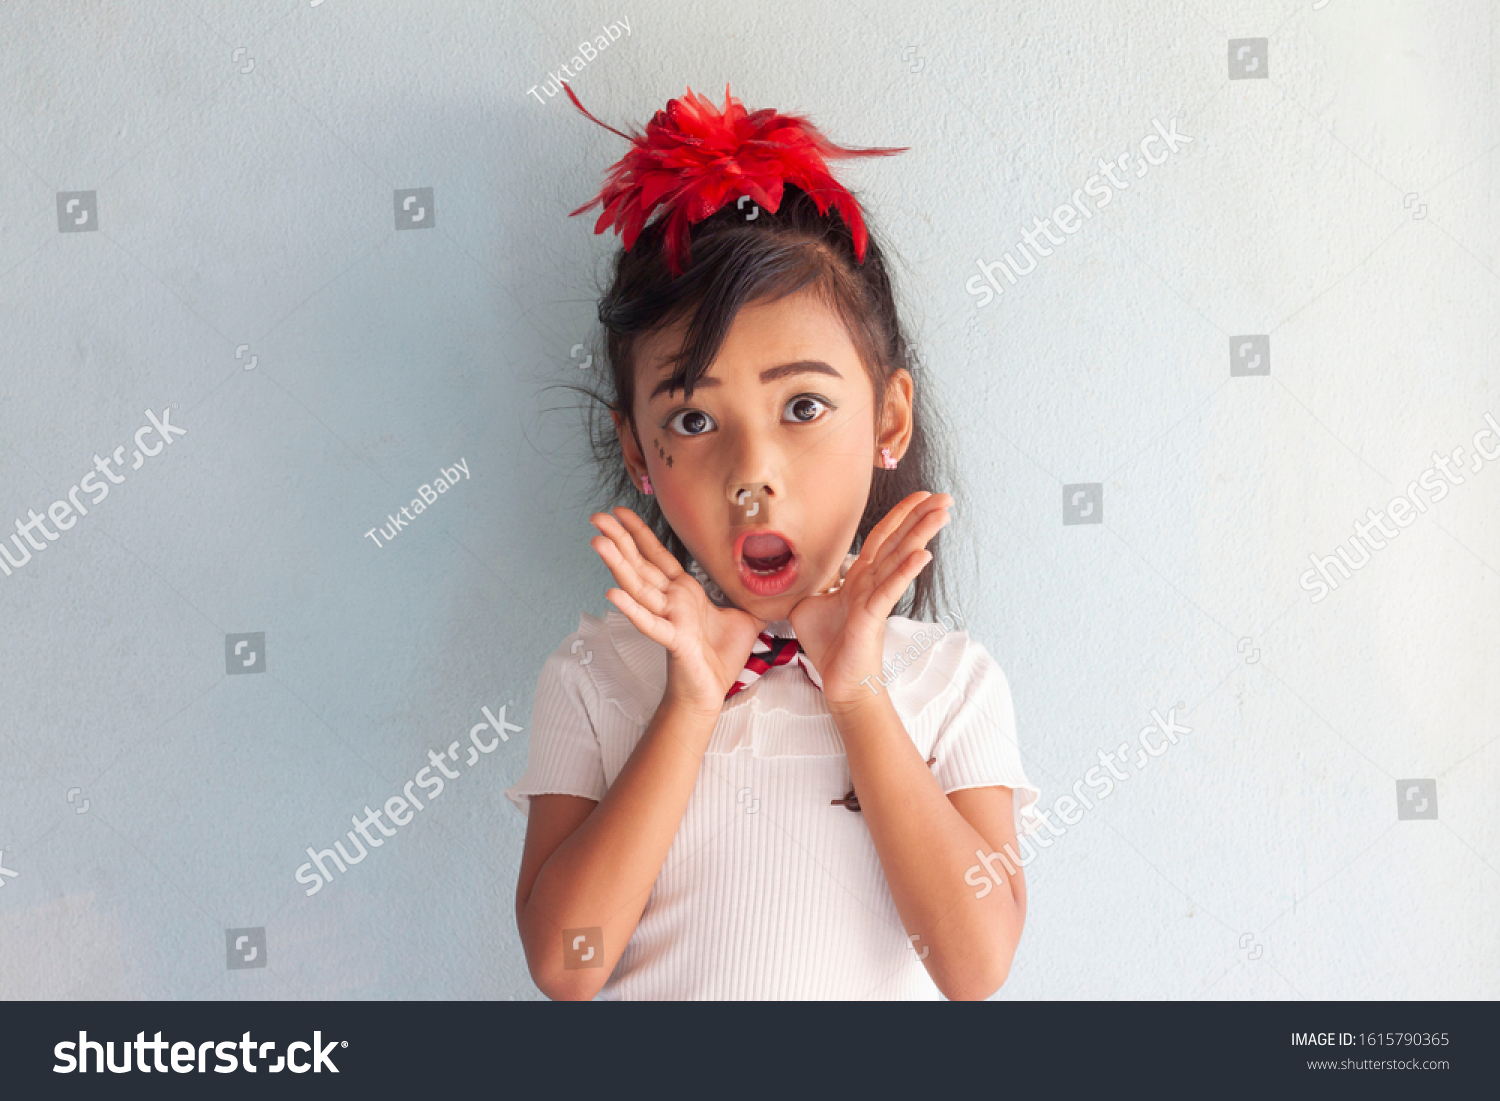 Asian Girl Mouth Open Images Stock Photos Vectors Shutterstock